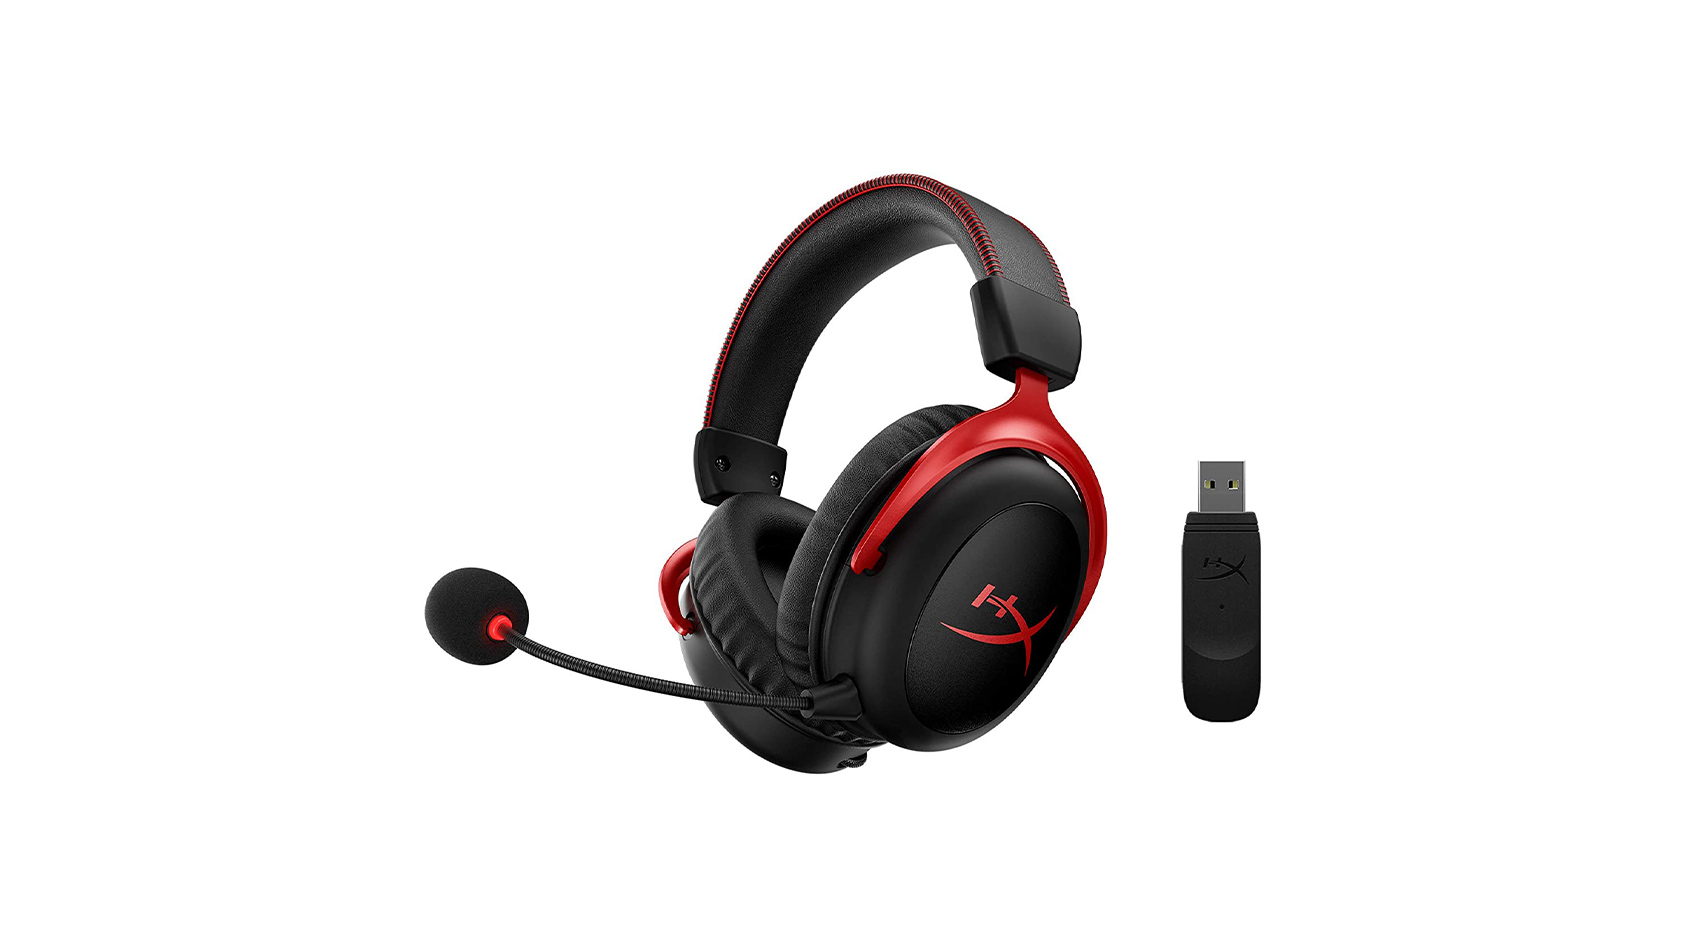 The HyperX Cloud II Wireless gaming headset and USB adapter in black/red against a white background.